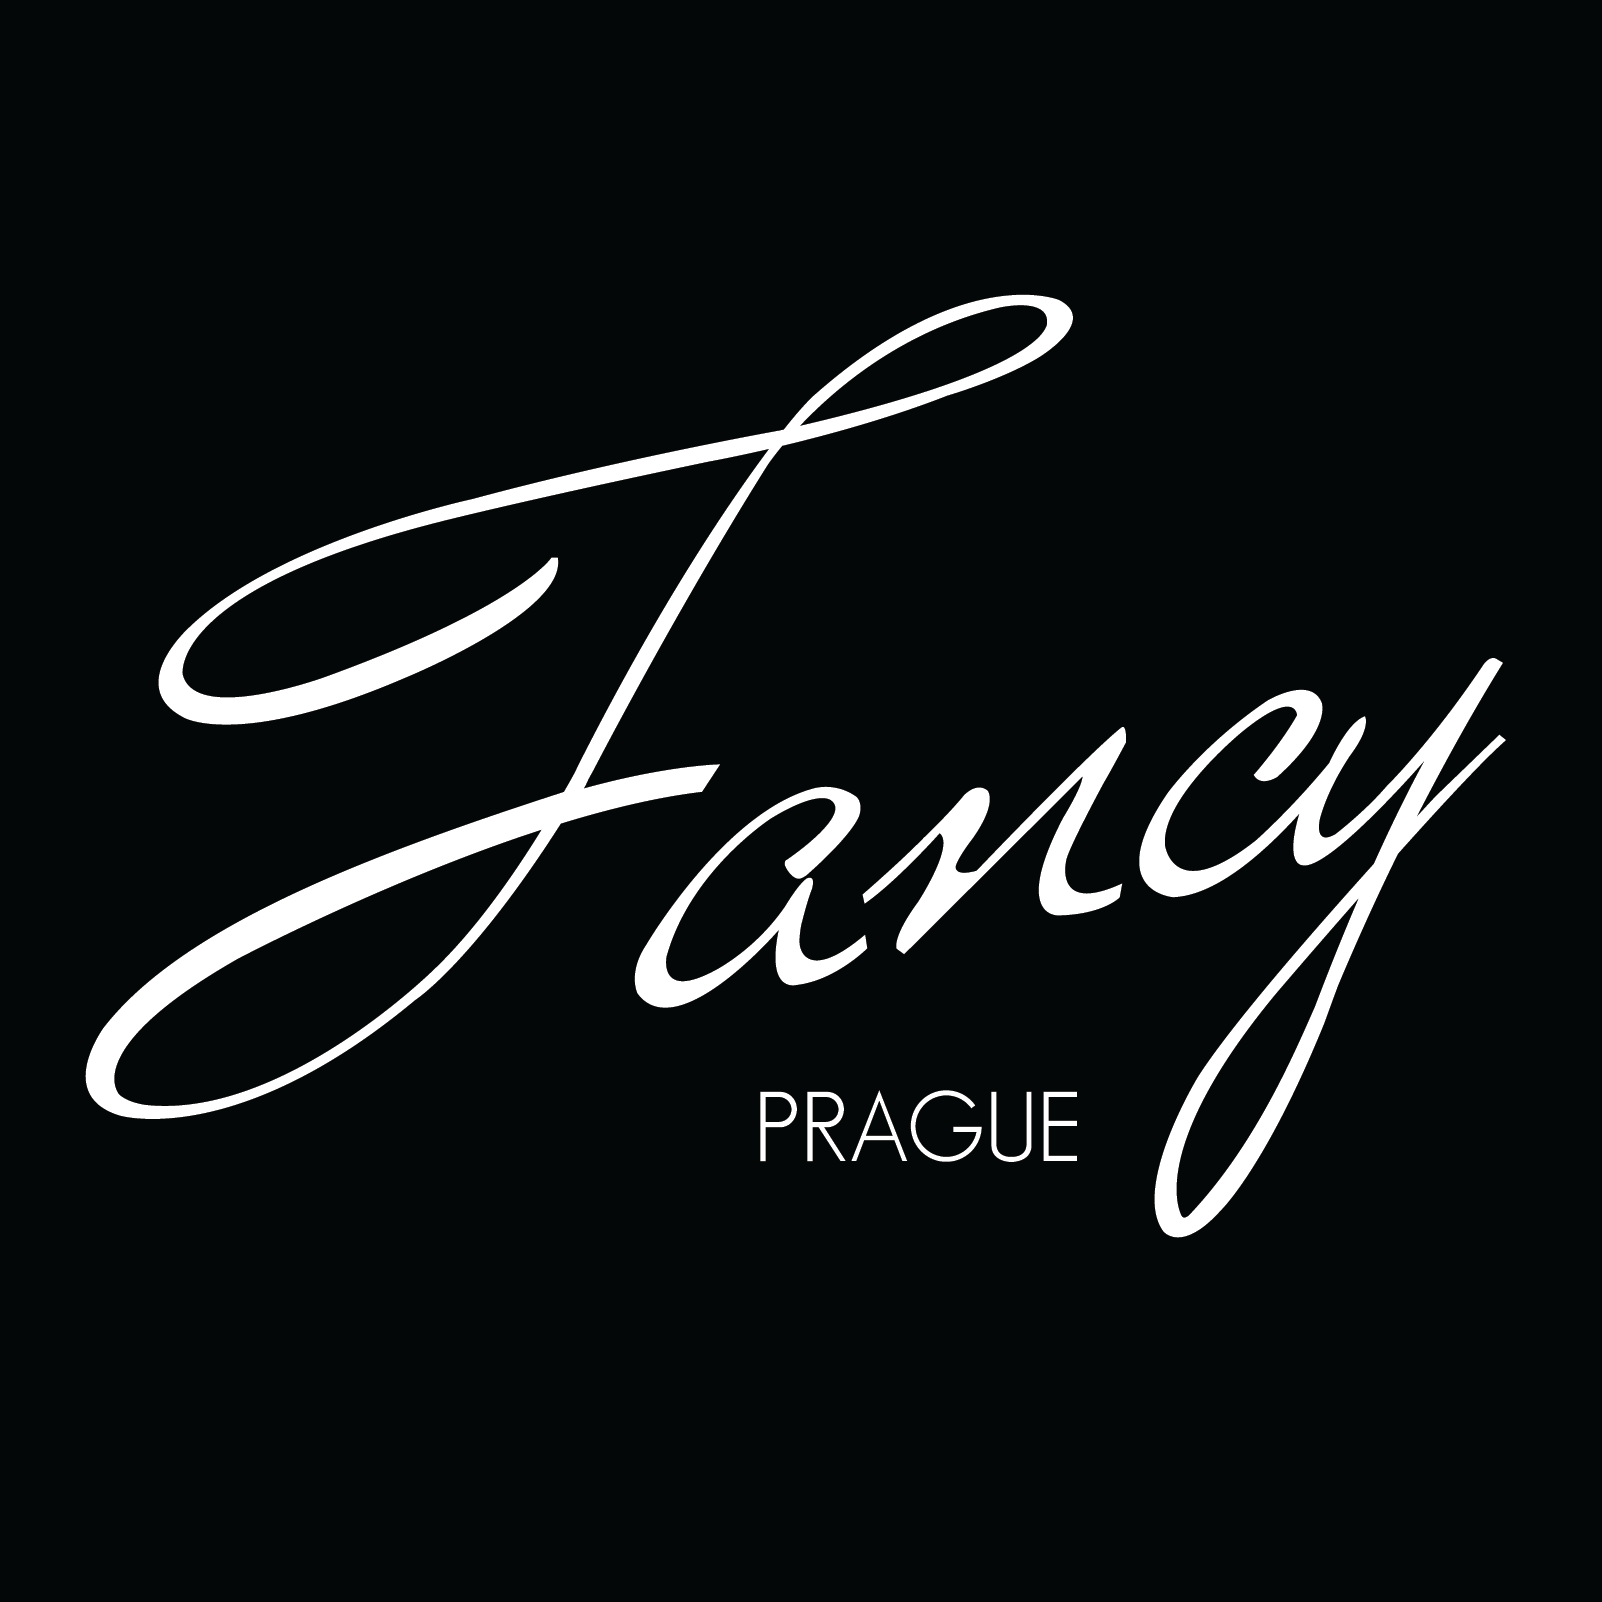 Fancy Lounge is Prague's hottest new RnB Club. Follow us for special offers, contests and all things fancy!